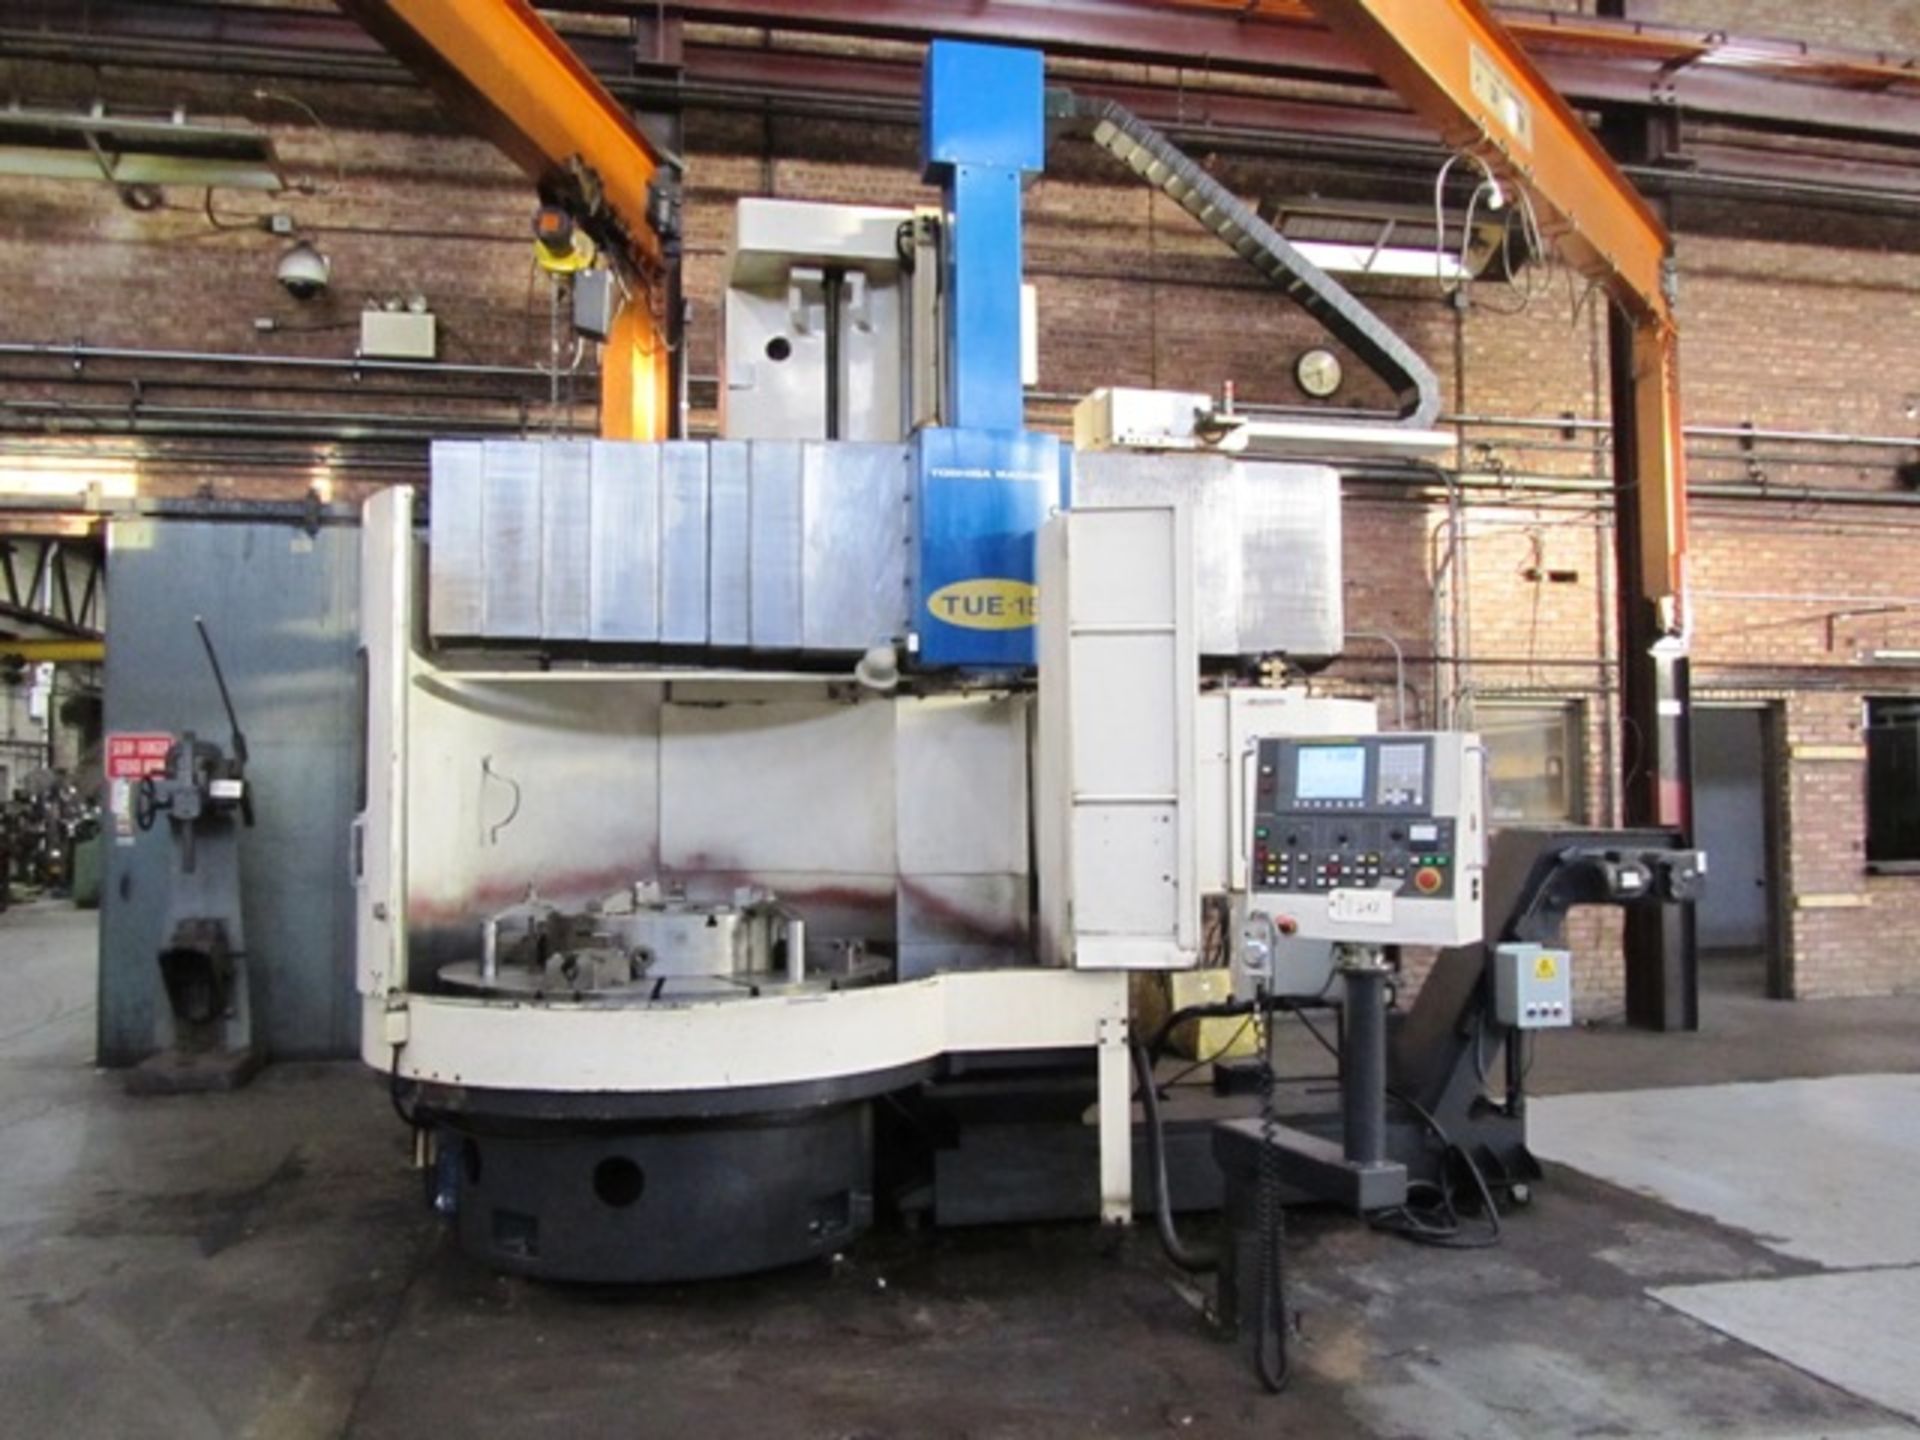 Toshiba TUE-15 12-ATC CNC Vertical Boring Mill with 59.05'' Table, 4-Jaw Chuck, 70.86'' Turning - Image 4 of 6